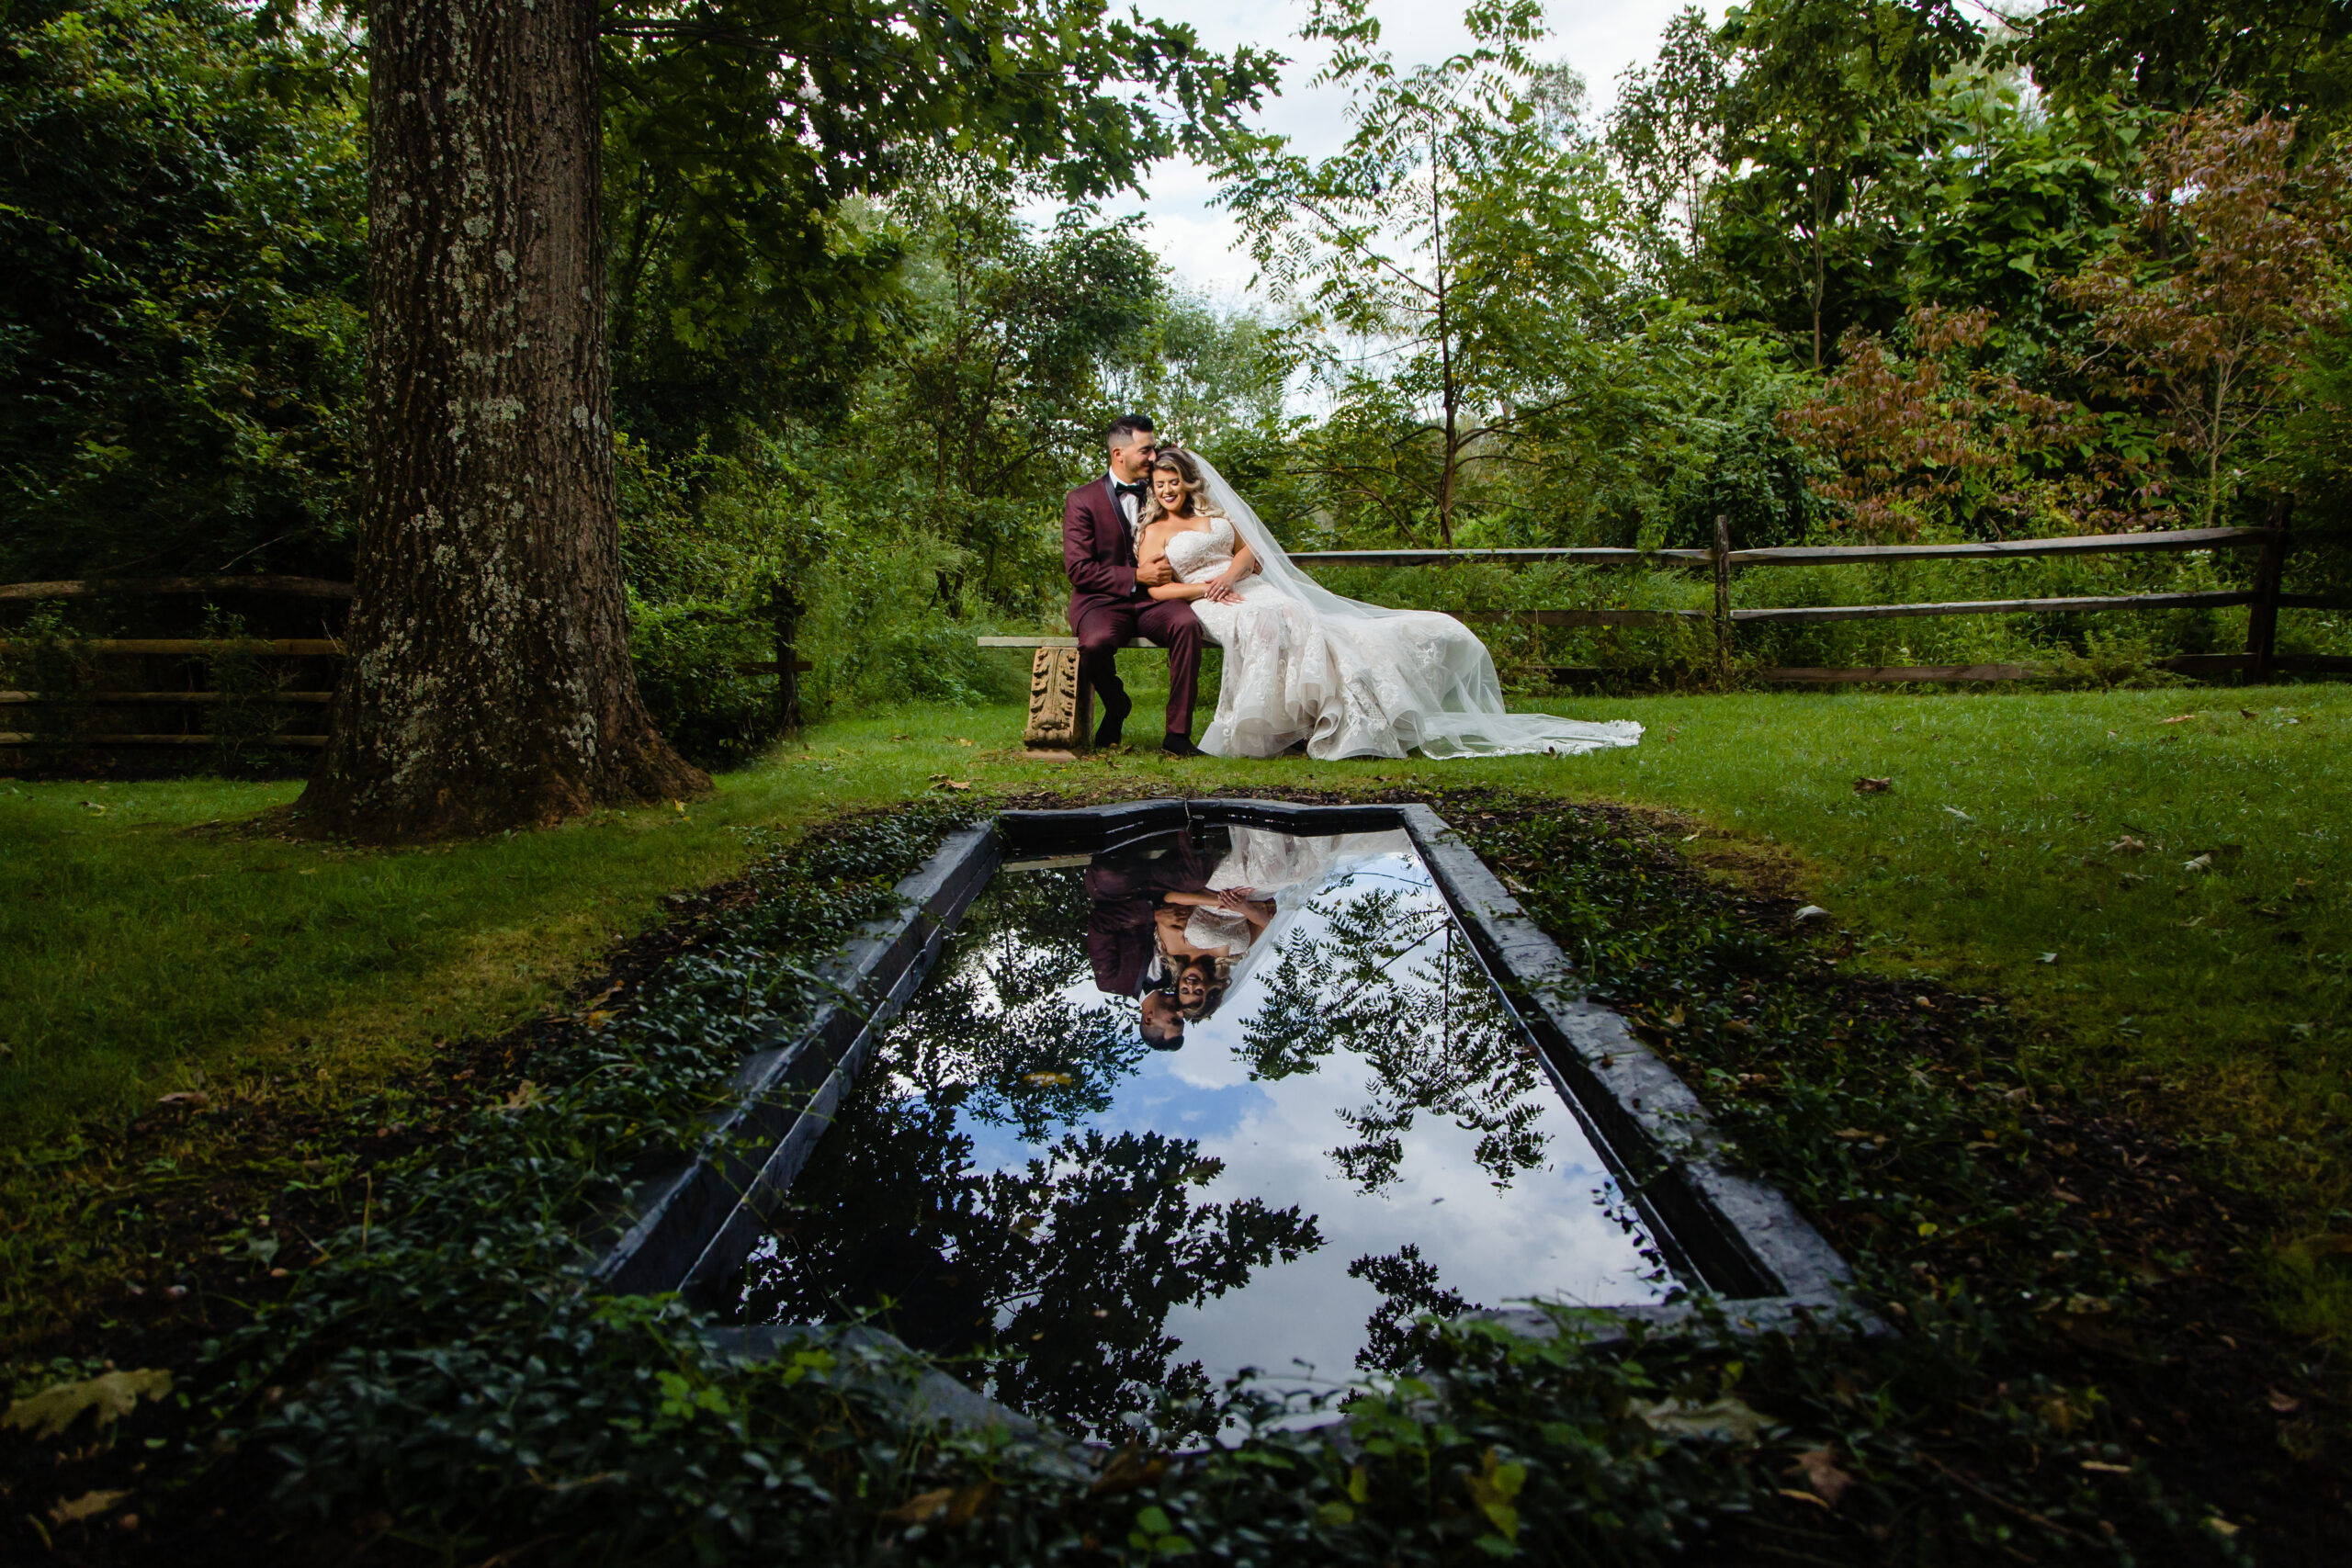 A bride and groom captured by New Jersey Wedding Photographer Jarot Bocanegra, posing in front of a pond.